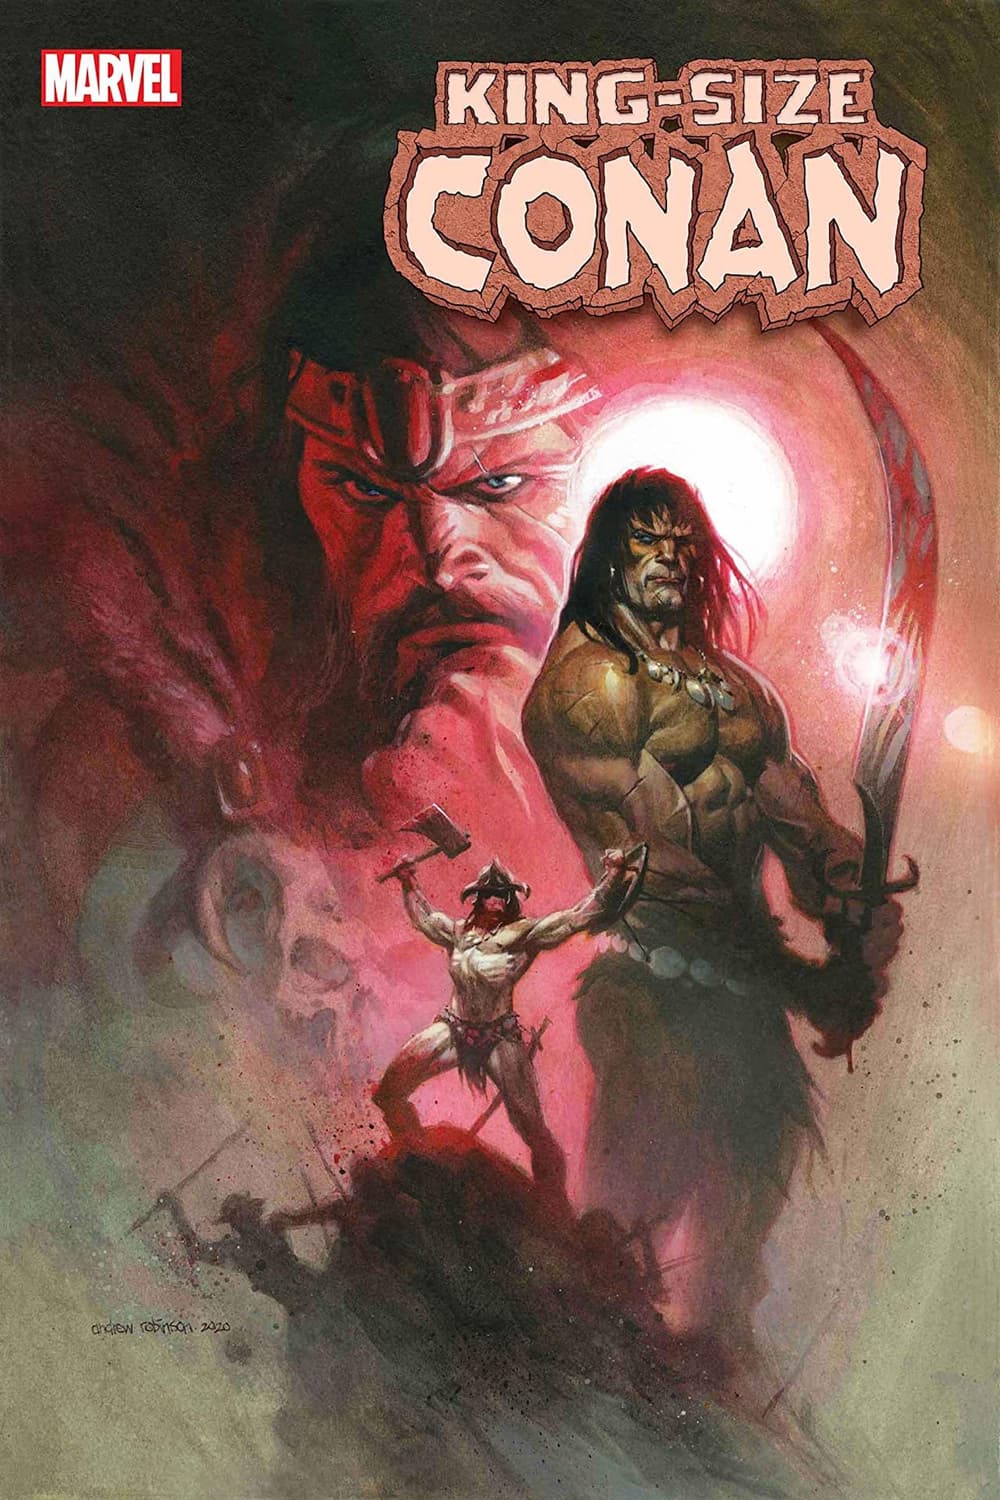 KING-SIZE CONAN #1 cover by Andrew C. Robinson